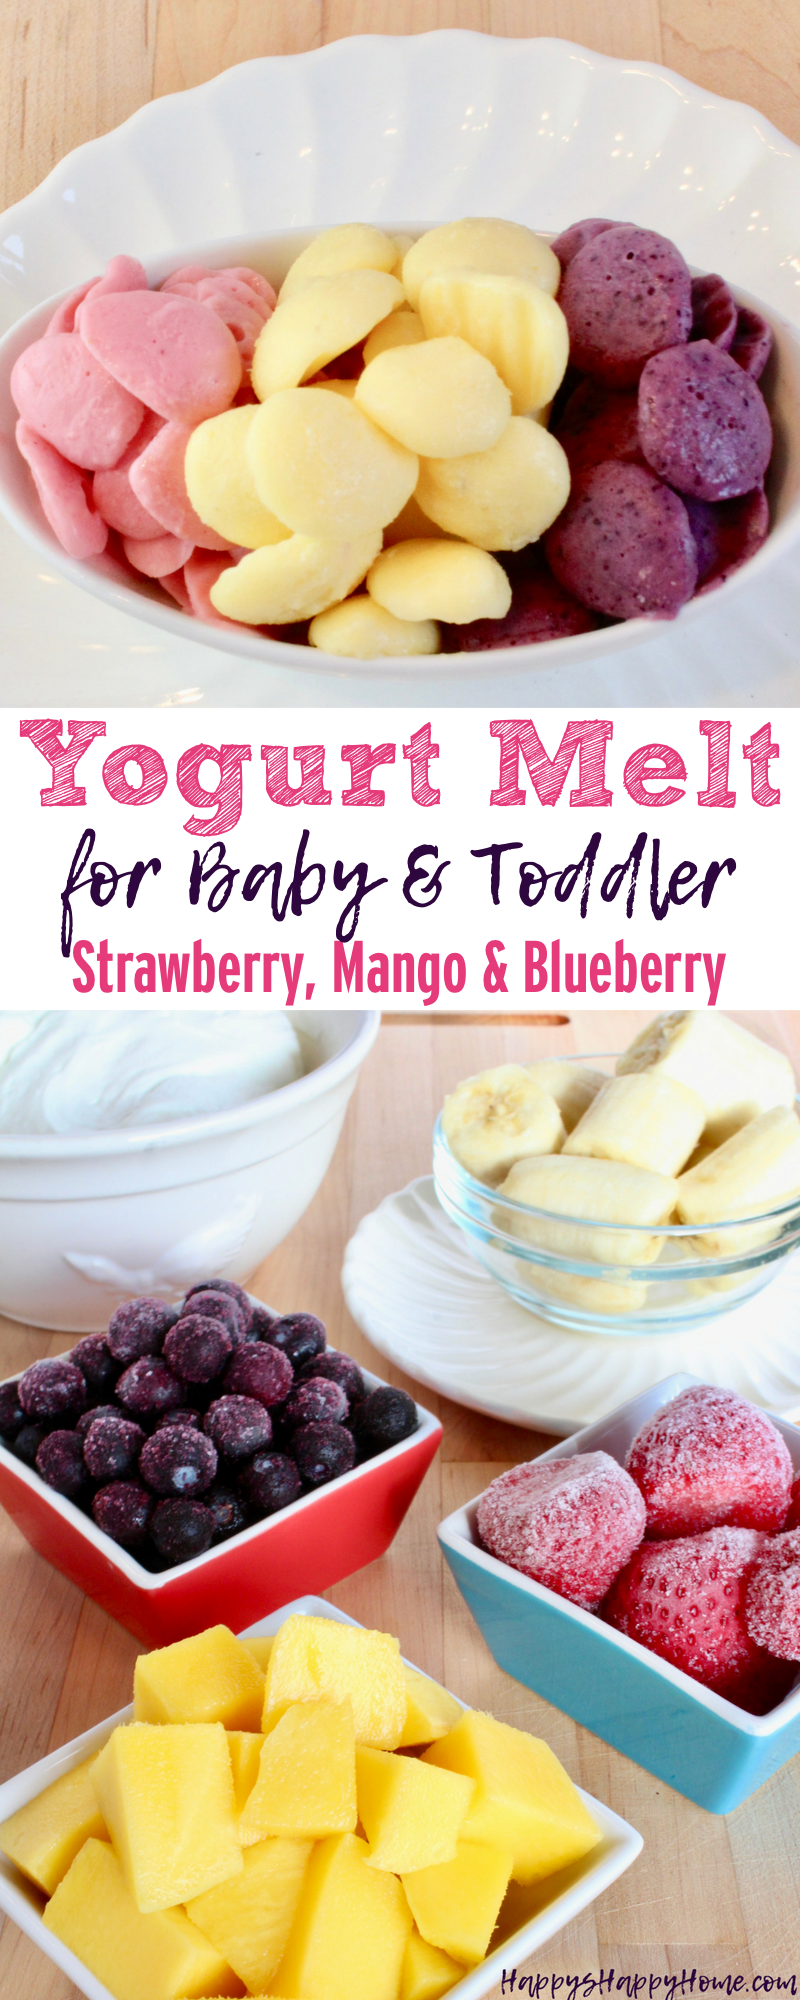 These Yogurt Melts are a healthy and sweet treat for babies and toddlers without added sugar!